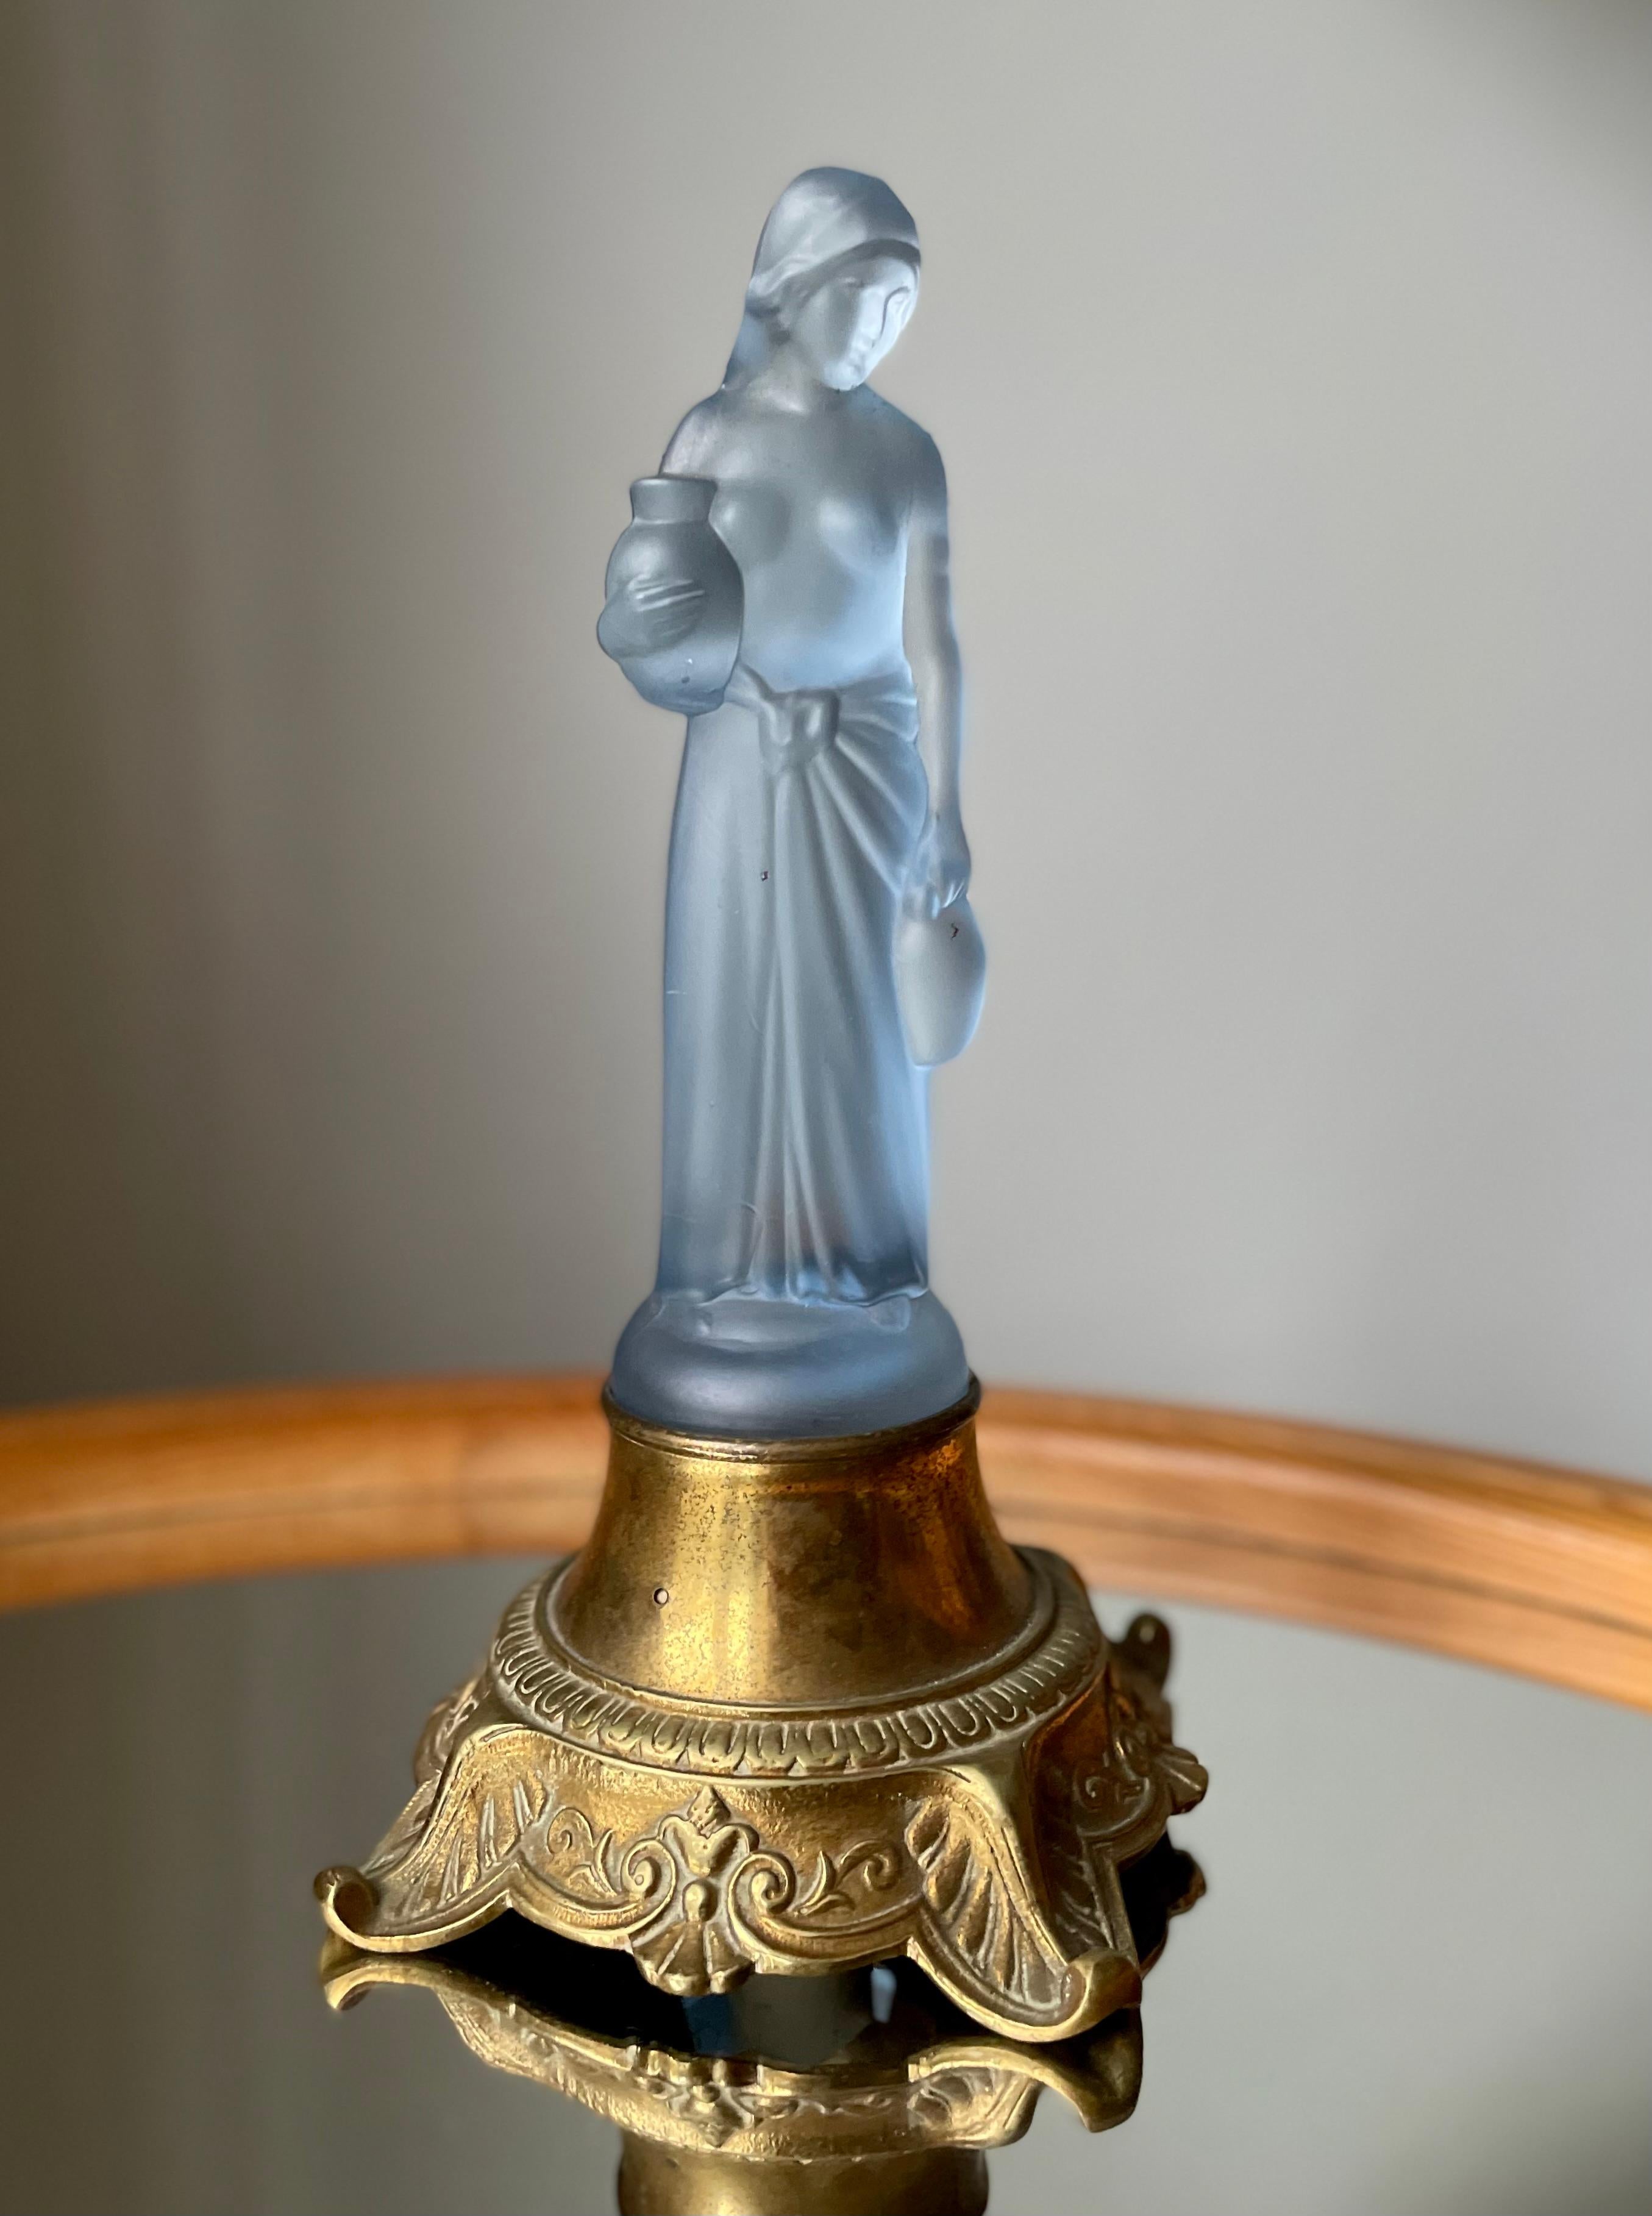 Light blue translucent frosted art glass shaped as a slender, long-haired woman wearing a long skirt and carrying a large jug in each hand. Mounted on decorative golden metal base on four feet.
Beautiful art nouveau piece in great vintage condition.